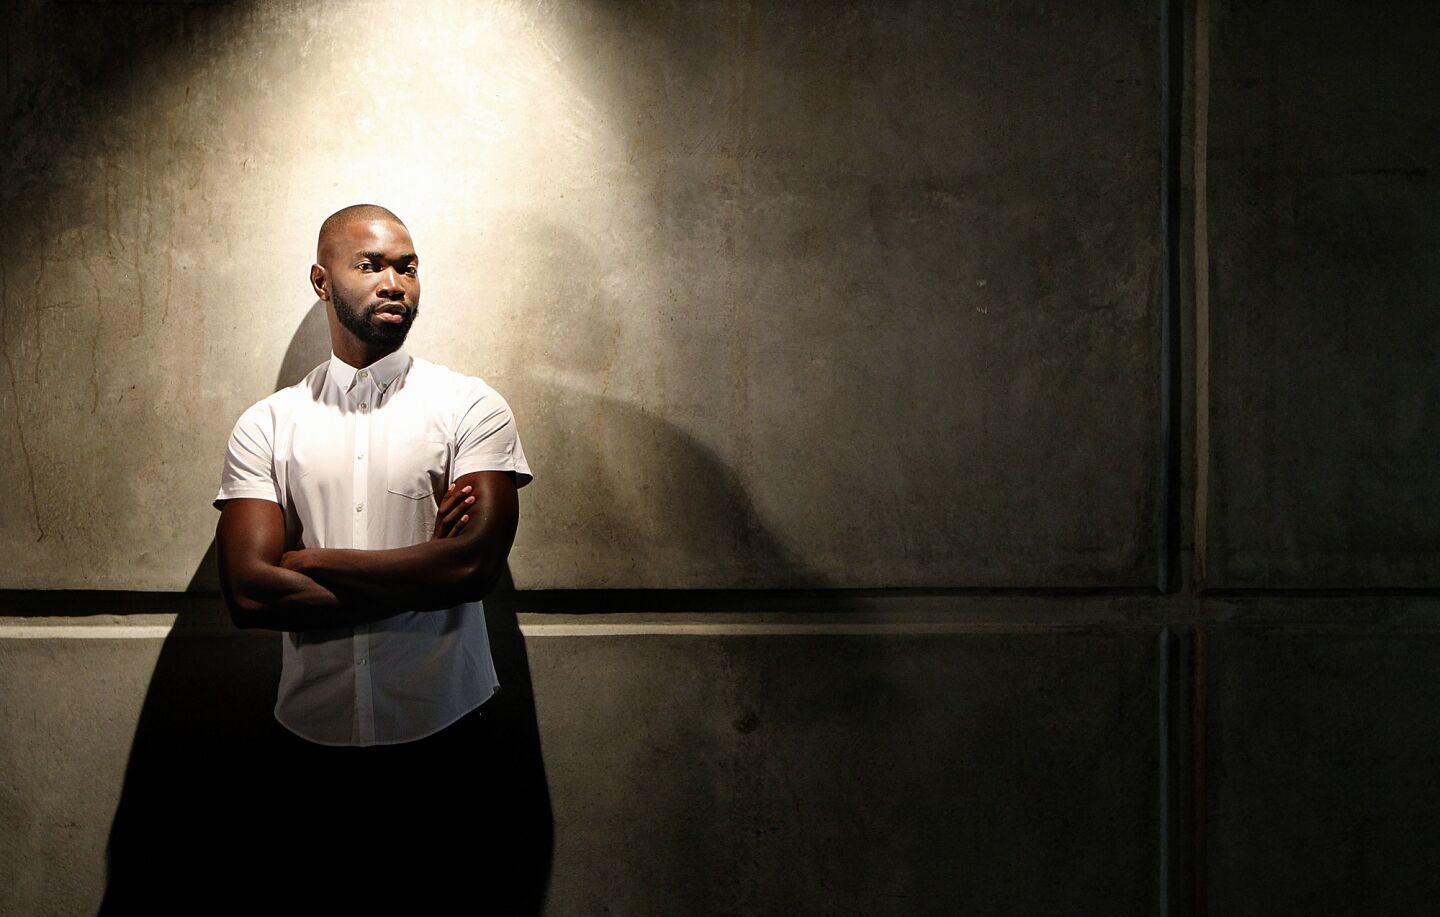 Arts and culture in pictures by The Times | Tarell Alvin McCraney